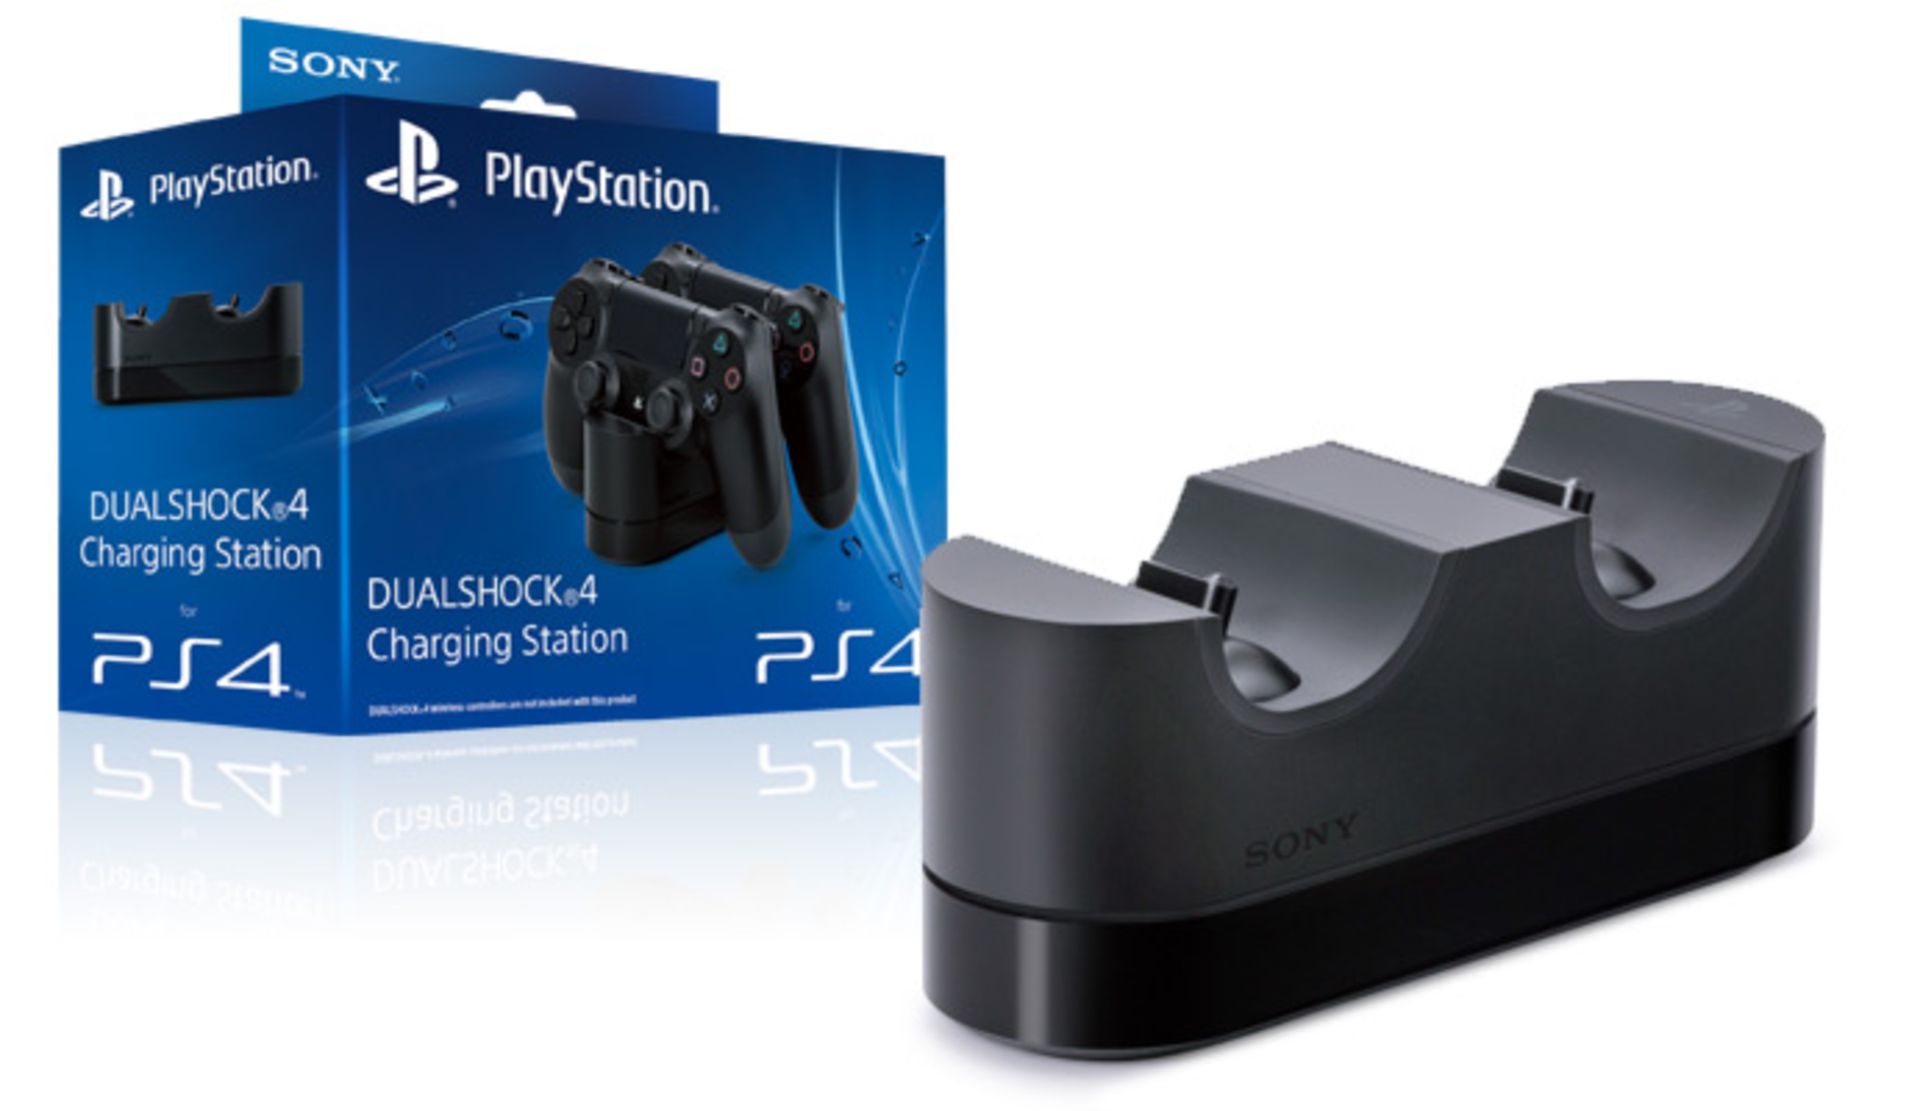 V Grade A Playstation 4 DualShock 4 Charging Station with AC Adaptor and Power Cord X 2 Bid price to